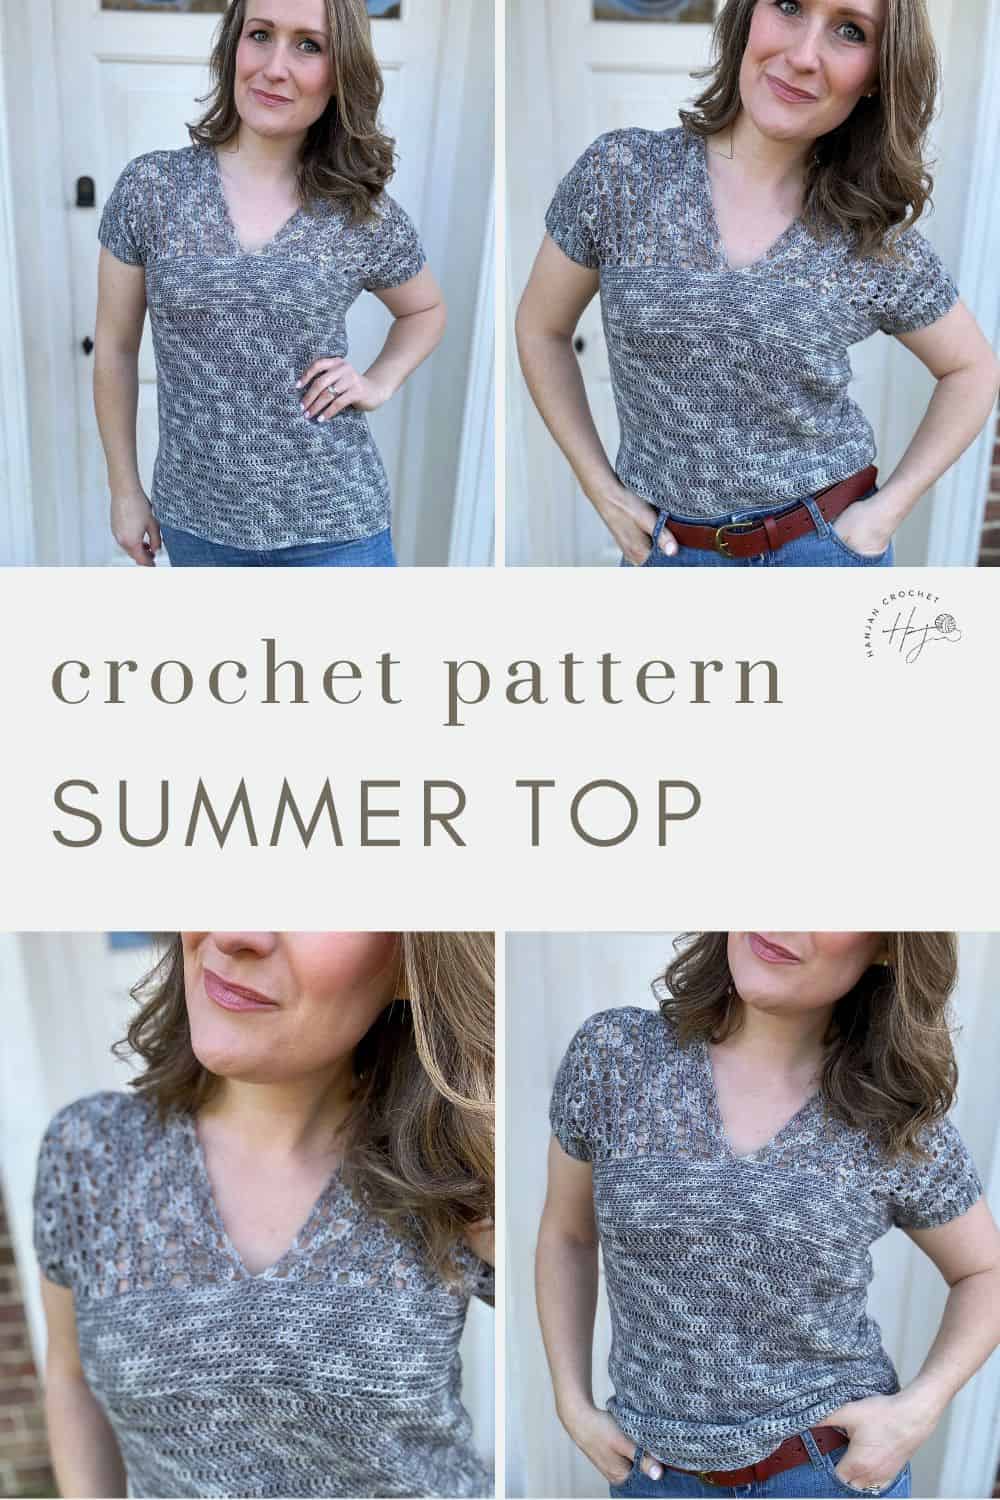 A woman models a grey and white v-neck crochet summer top in various poses. The text "crochet pattern SUMMER TOP" is displayed in the center.